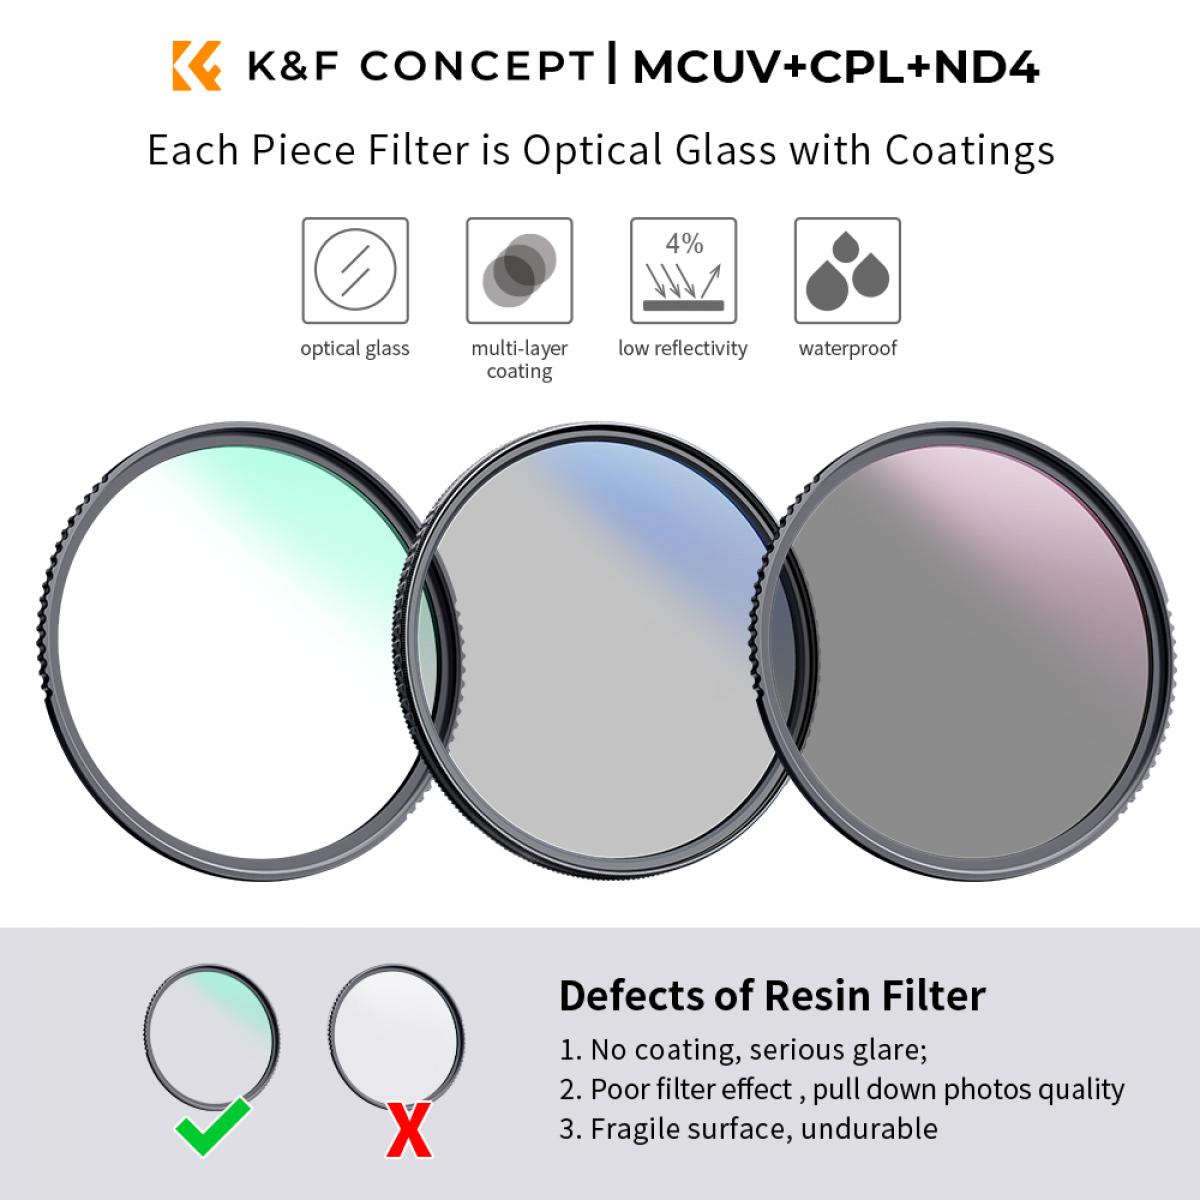 58mm MCUV+CPL+ND4 Lens Filter Kit with Lens Cleaning Cloth and Filter Bag